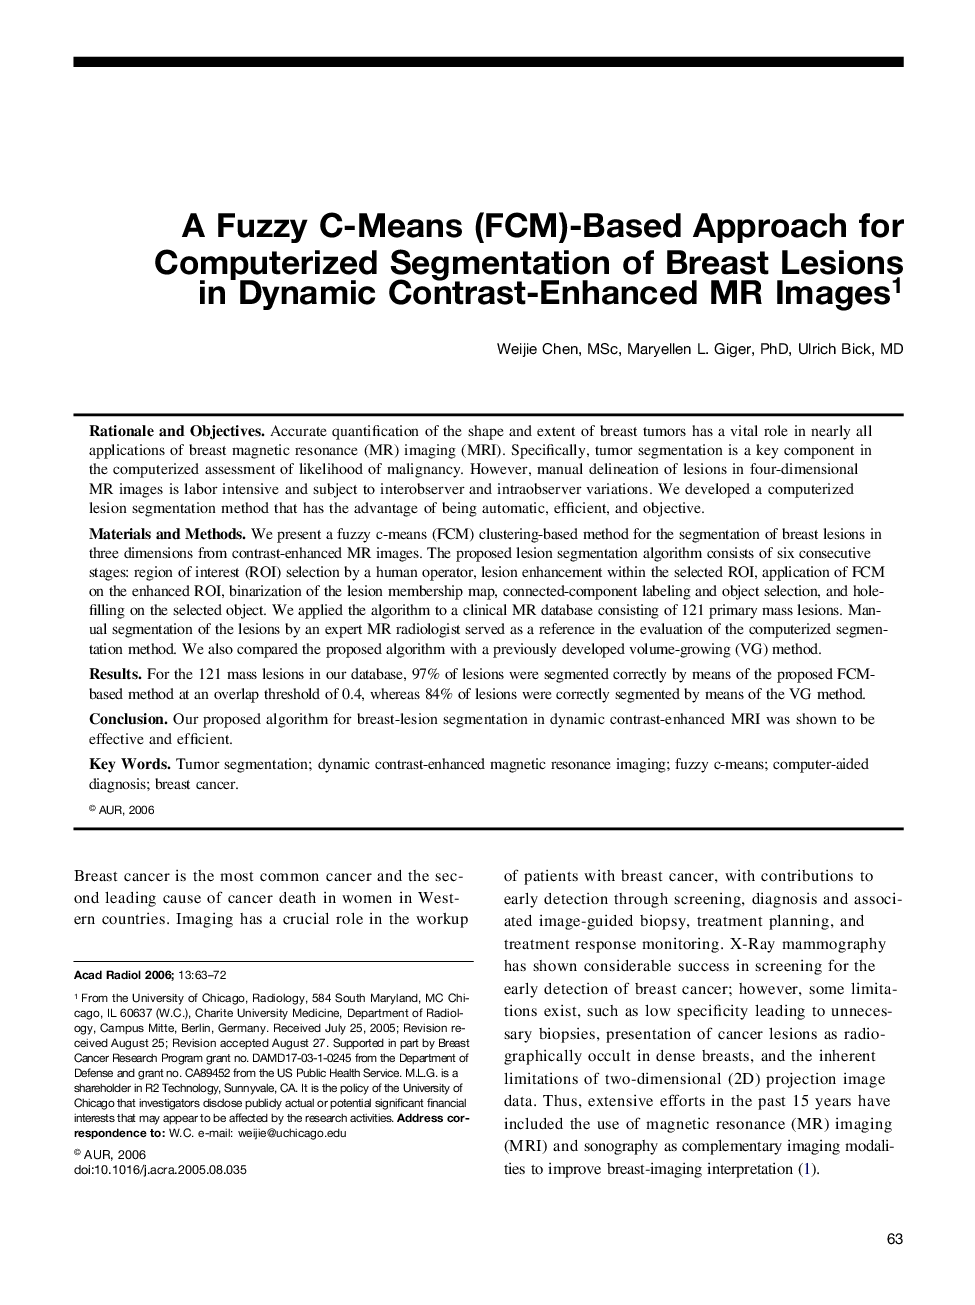 A Fuzzy C-Means (FCM)-Based Approach for Computerized Segmentation of Breast Lesions in Dynamic Contrast-Enhanced MR Images1